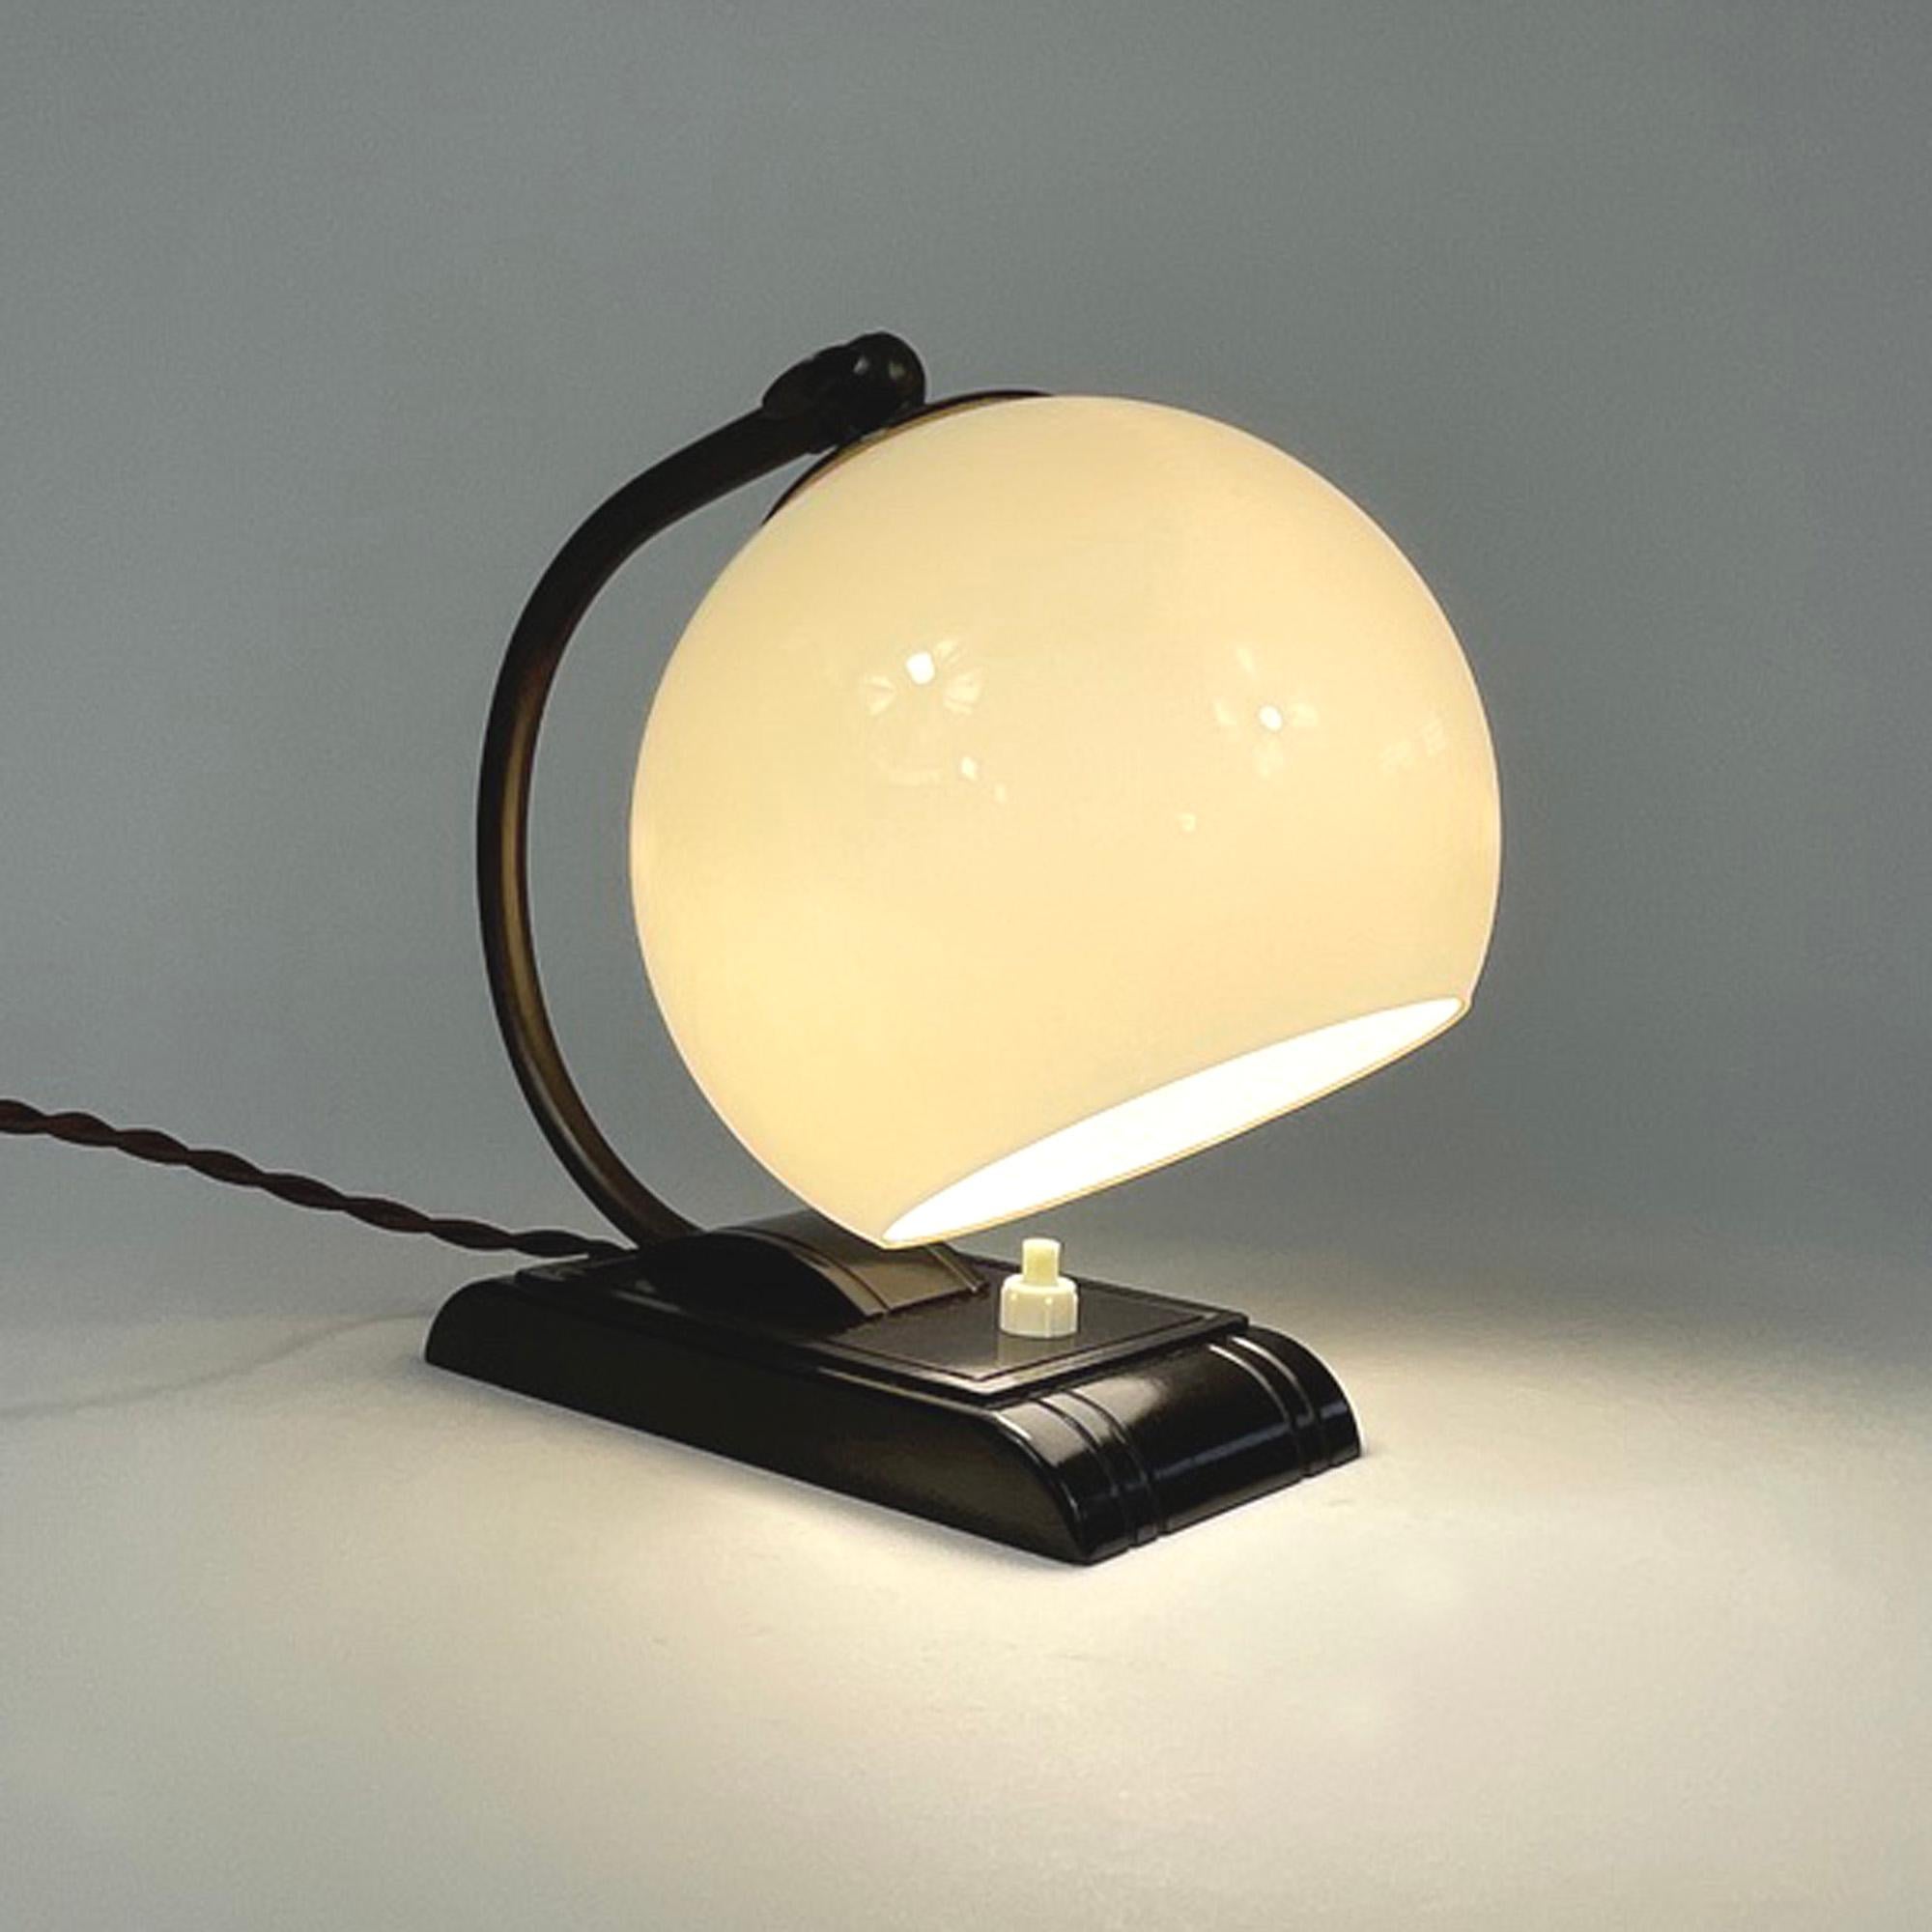 Art Deco Streamline Design Bakelite and Opaline Table Lamp, 1920s to 1930s For Sale 8